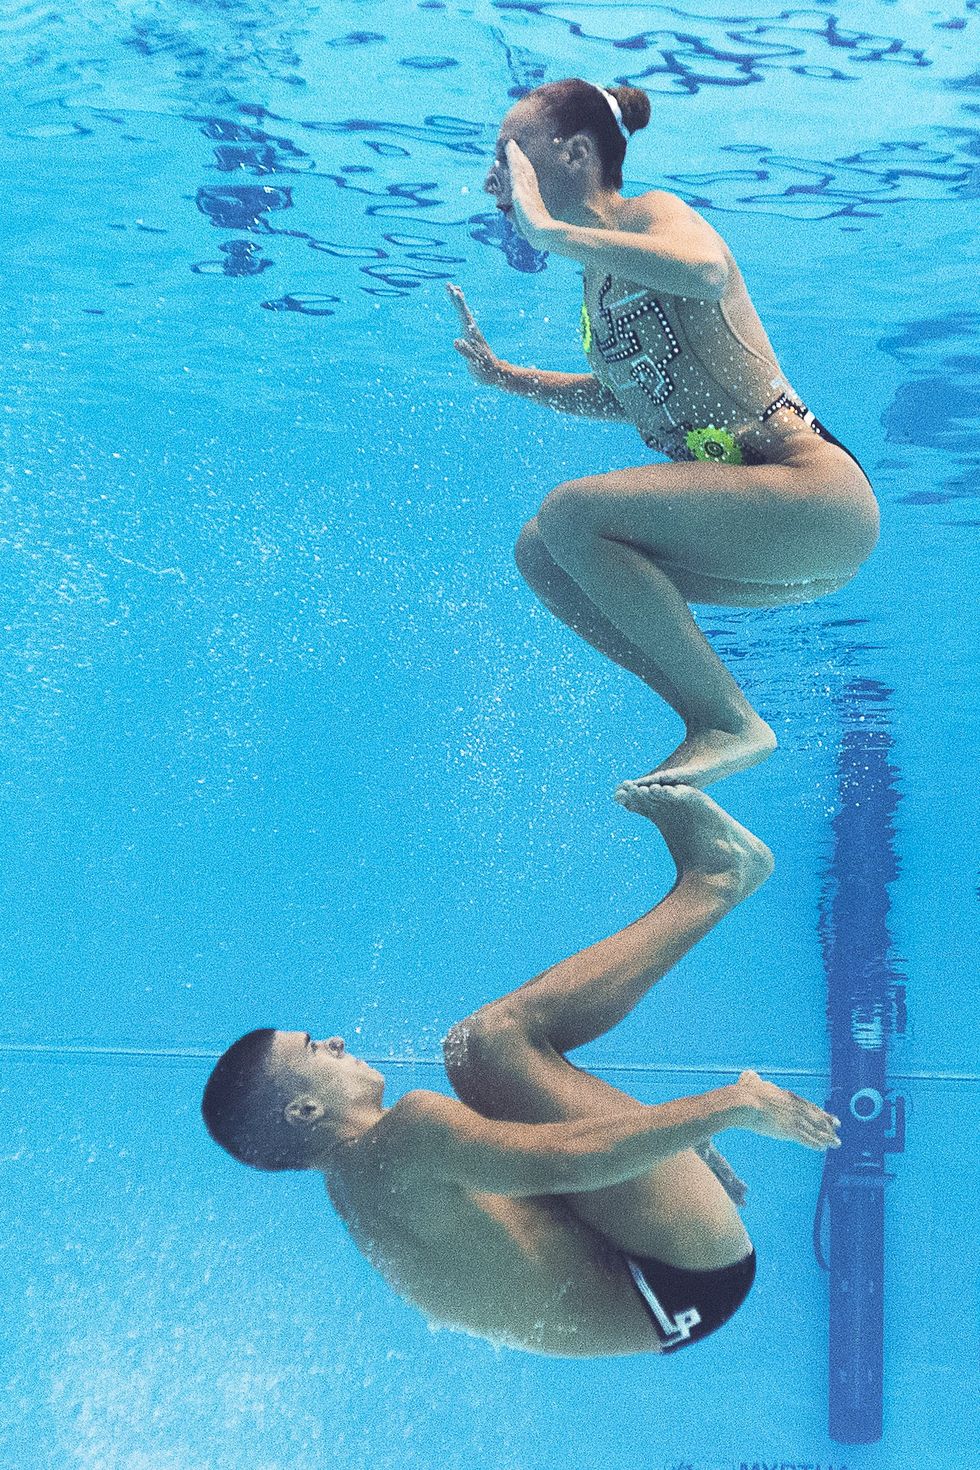 A picture taken with an underwater camera shows Italy's mixed duet Manila Flamini and Giorgio Minisini competing in the Mixed Duet Technical preliminary during the synchronised swimming competition at the 2015 FINA World Championships in Kazan on July 25, 2015.  competes in the Mixed Duet Technical preliminary during the synchronised swimming competition at the 2015 FINA World Championships in Kazan on July 25, 2015.  AFP PHOTO / FRANCOIS XAVIER MARIT        (Photo credit should read FRANCOIS XAVIER MARIT/AFP/Getty Images)